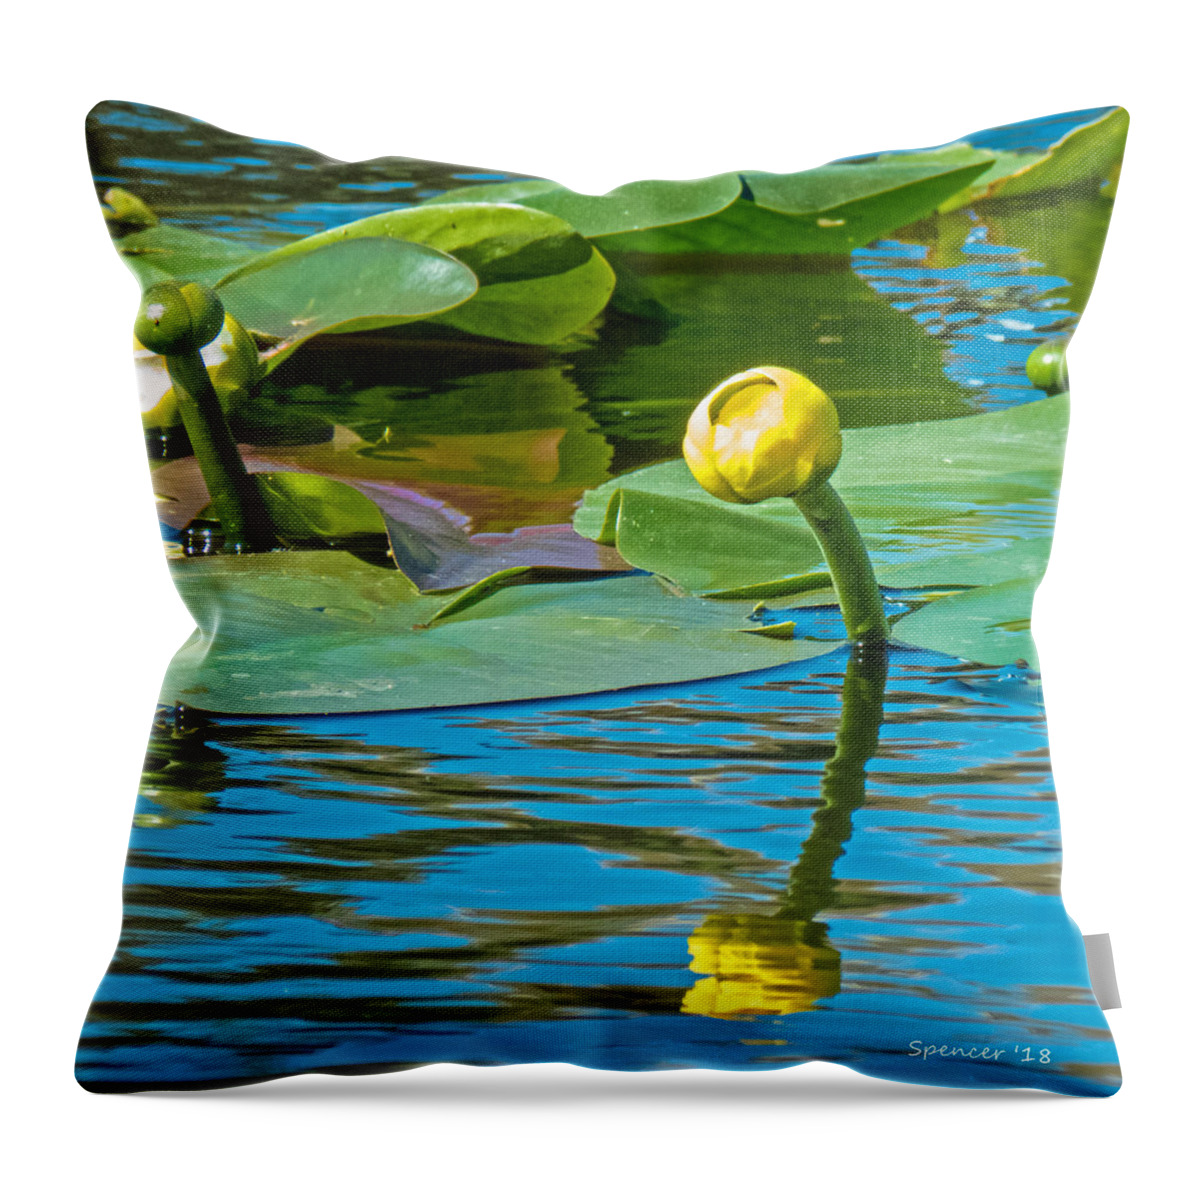 Plant Throw Pillow featuring the photograph Spatterdock Bloom by T Guy Spencer